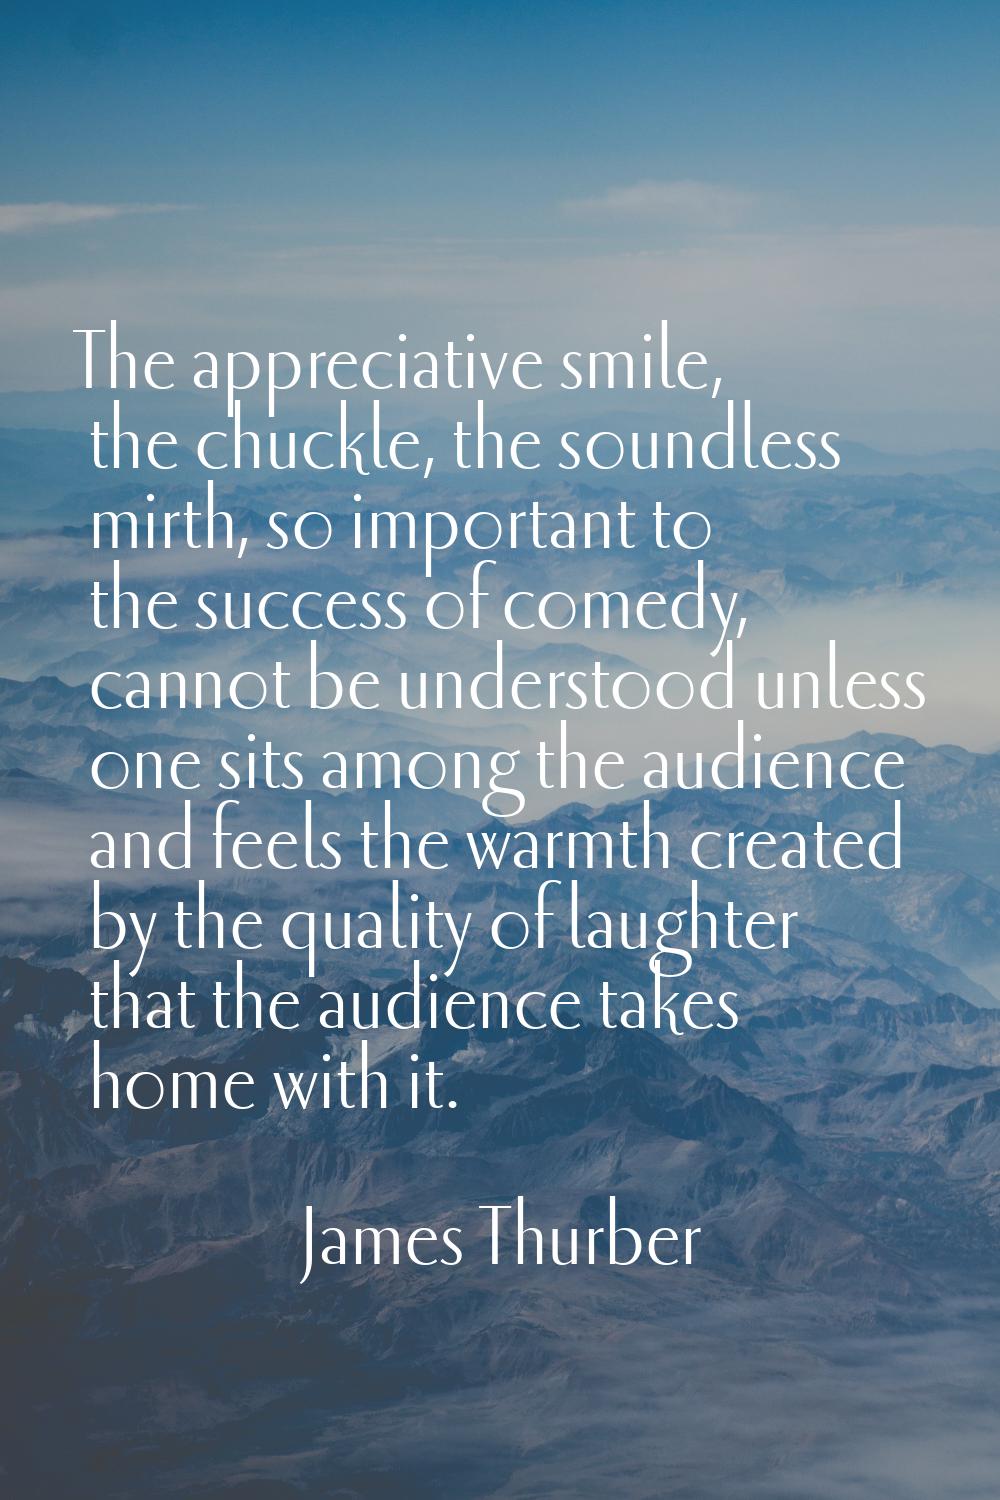 The appreciative smile, the chuckle, the soundless mirth, so important to the success of comedy, ca